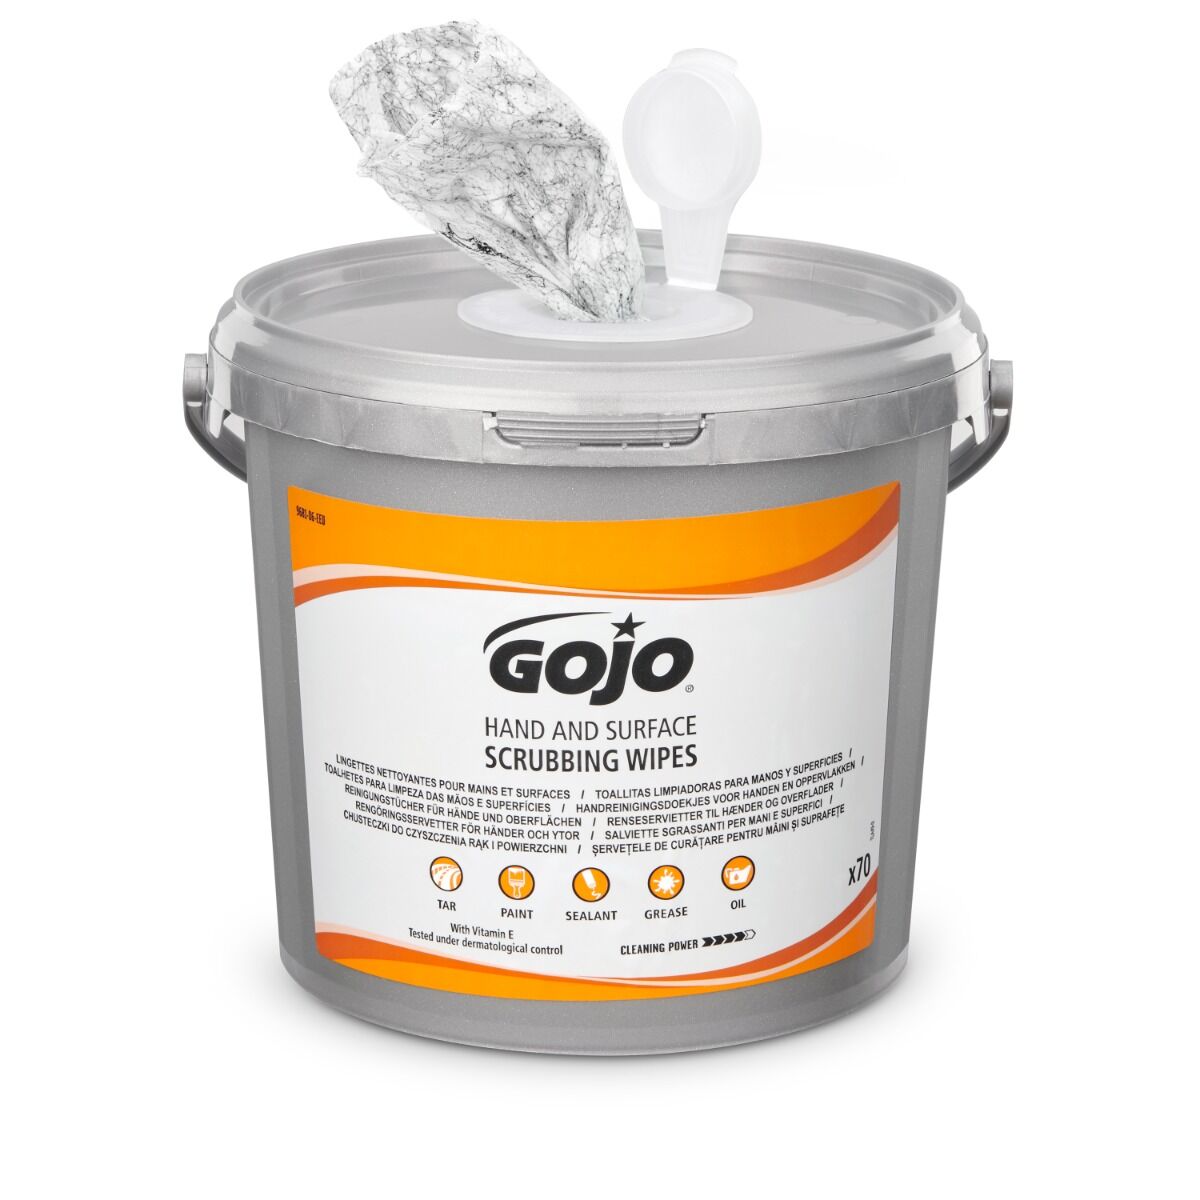 GOJO HEAVY-DUTY HAND AND SURFACE SCRUBBING WIPES, 70 Count Bucket - PURELL  UK